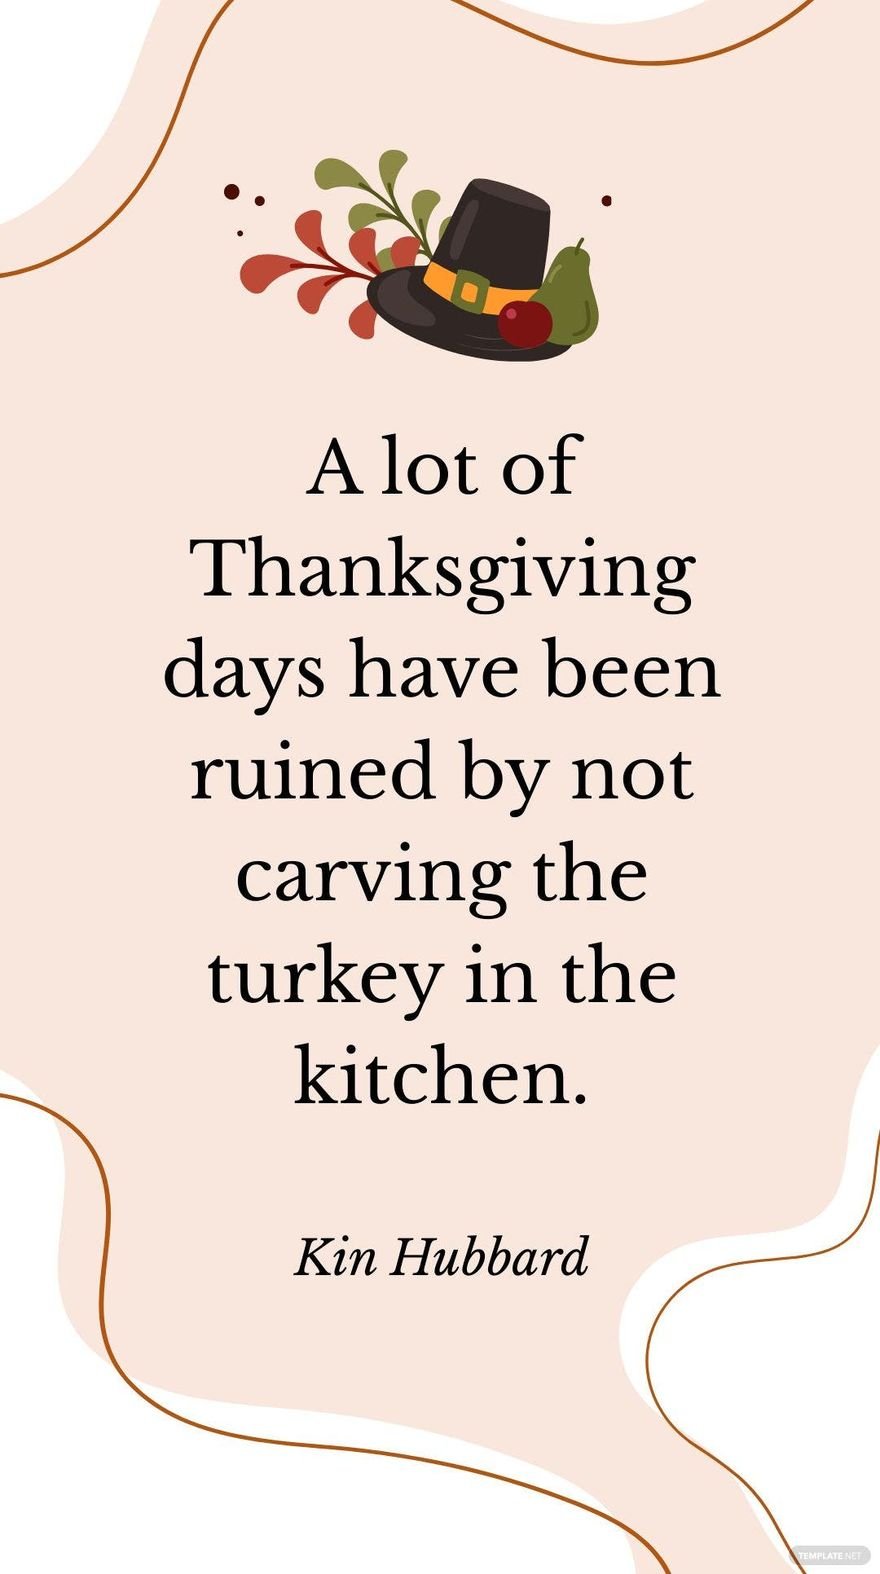 Kin Hubbard - A lot of Thanksgiving days have been ruined by not carving the turkey in the kitchen.